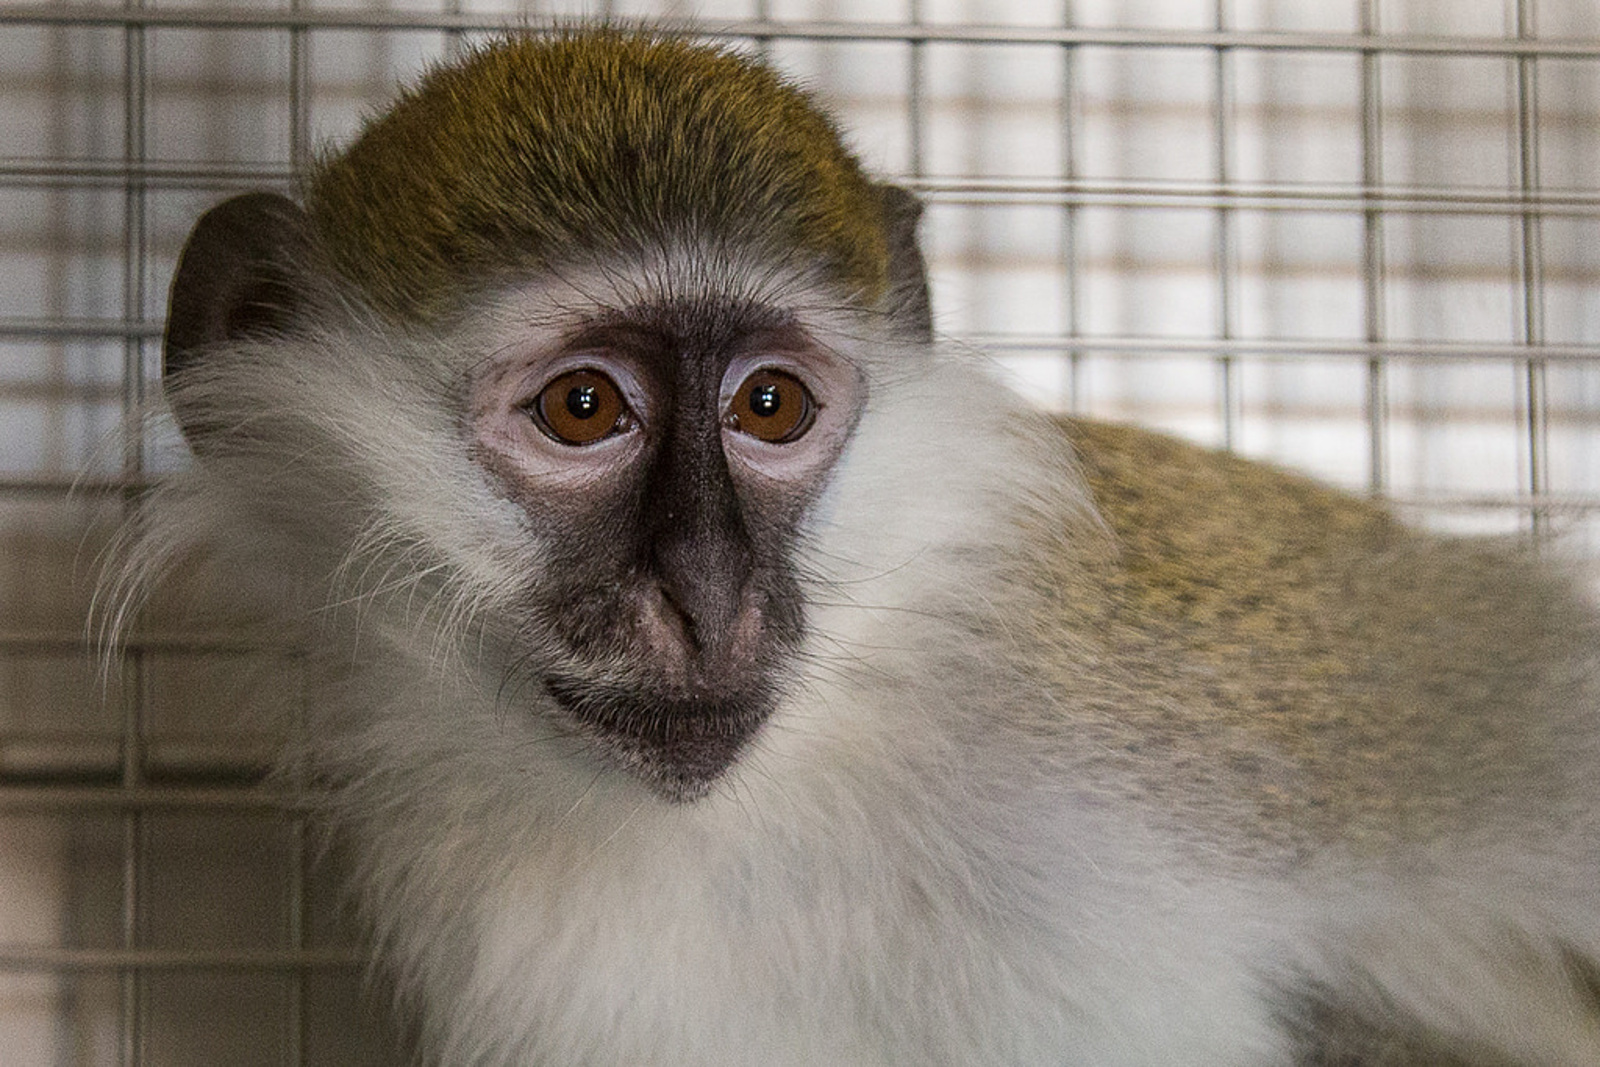 How We Saved a 2-Year-Old Monkey From a Miserable Life as a Pet (PHOTOS)